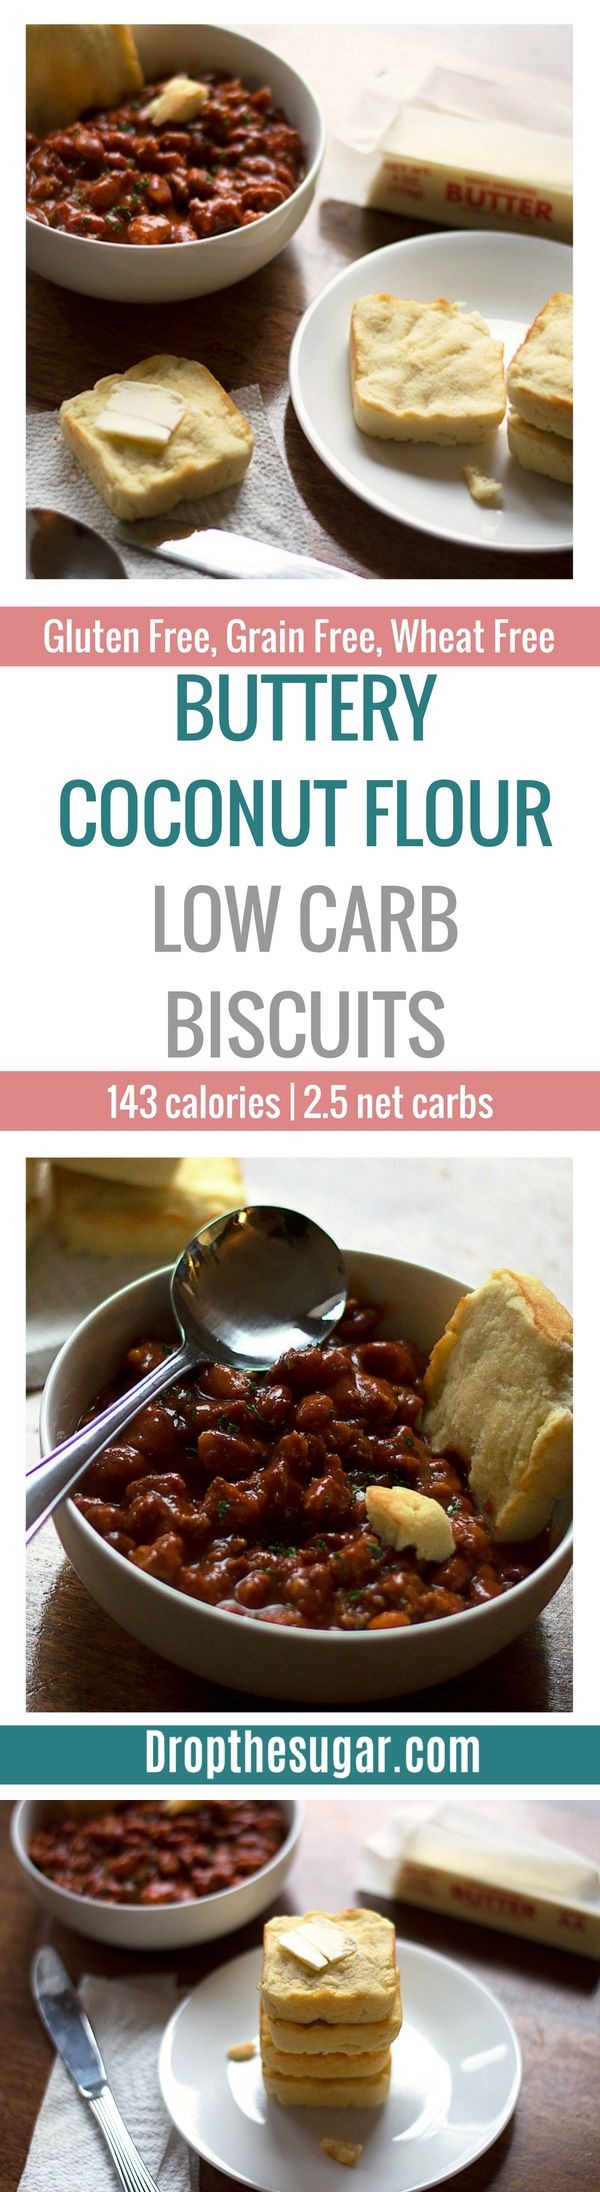 Buttery Coconut Flour Low Carb Biscuits